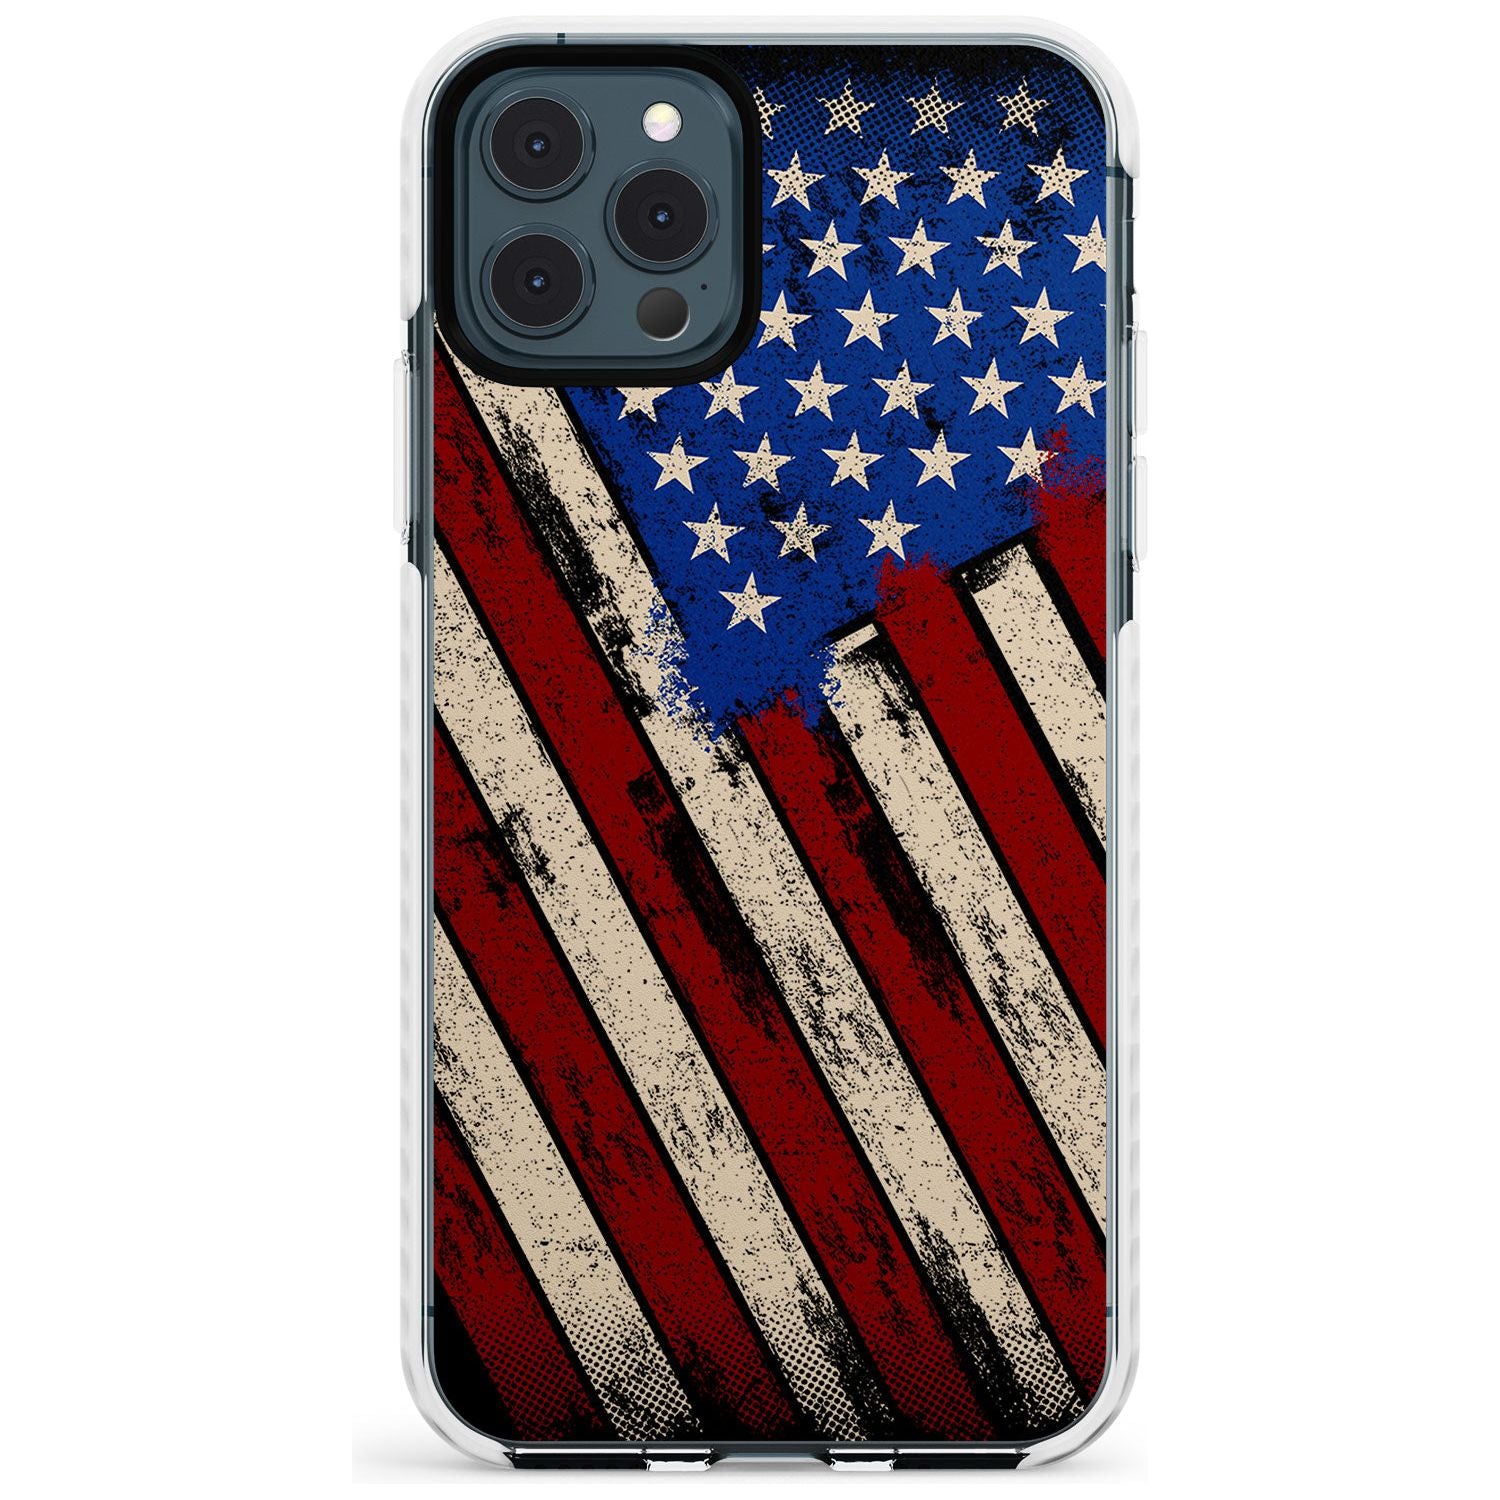 Distressed US Flag Impact Phone Case for iPhone 11 Pro Max